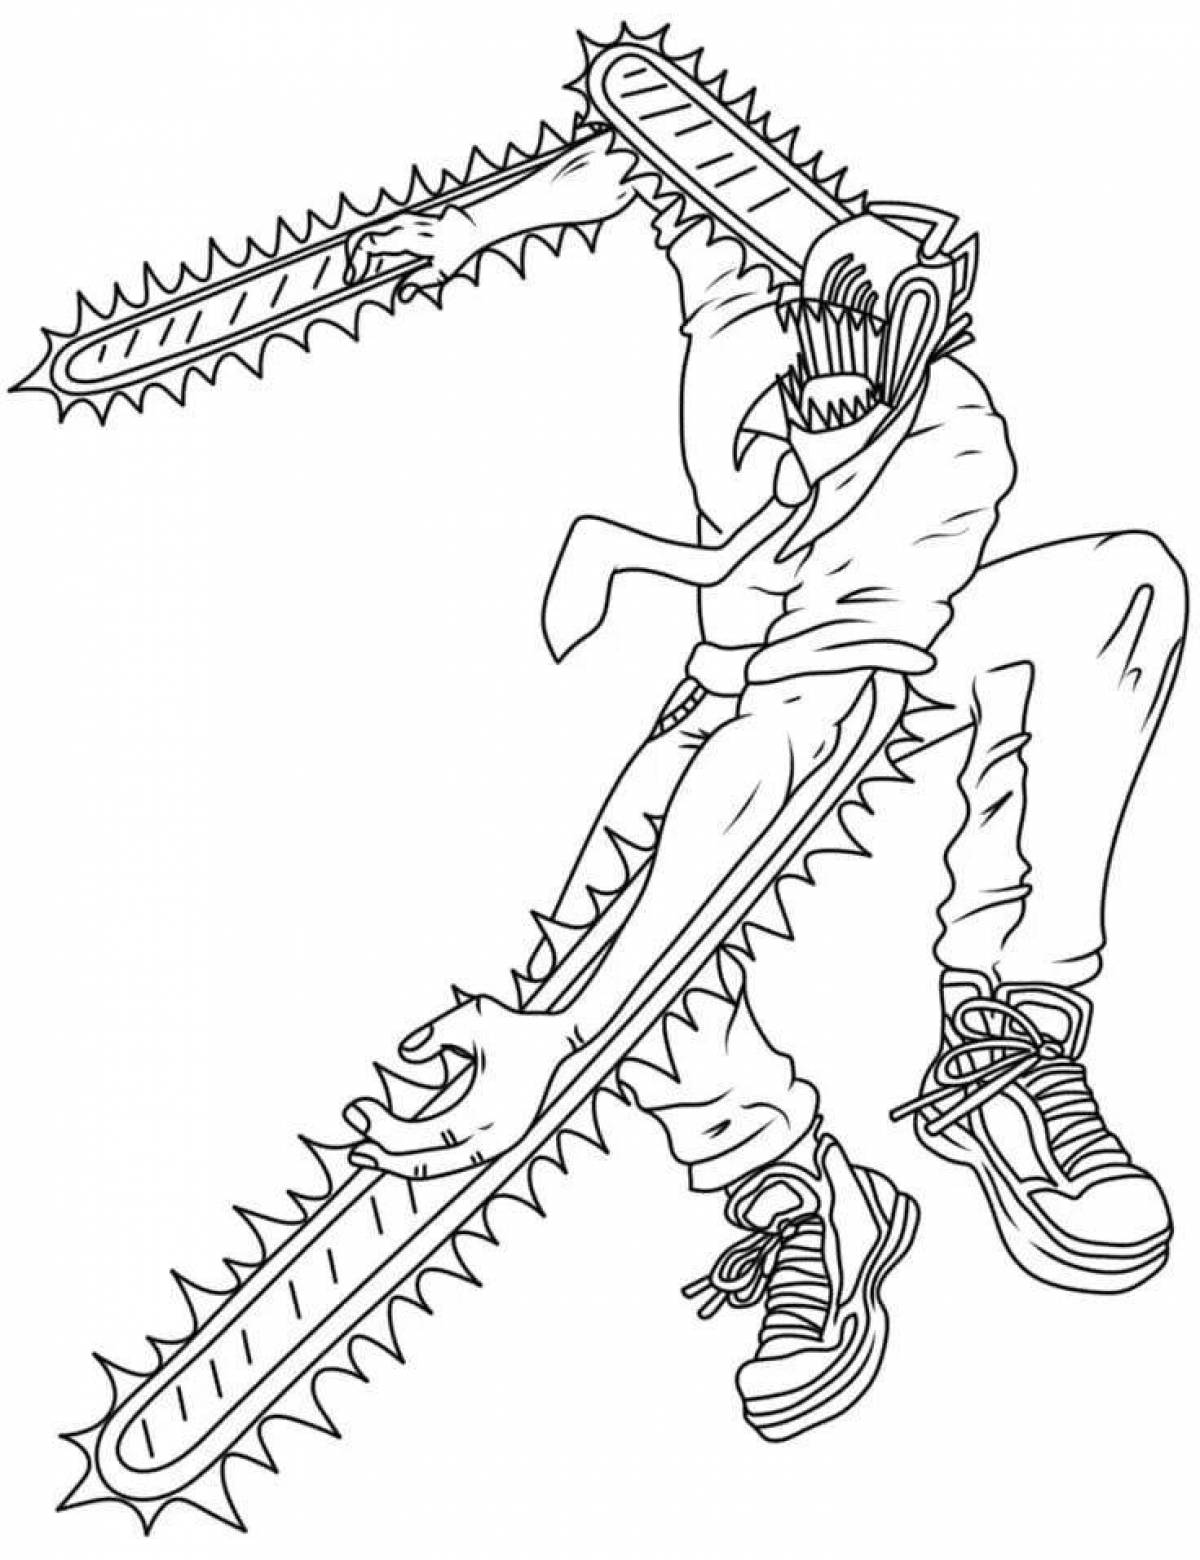 Fancy chainsaw coloring